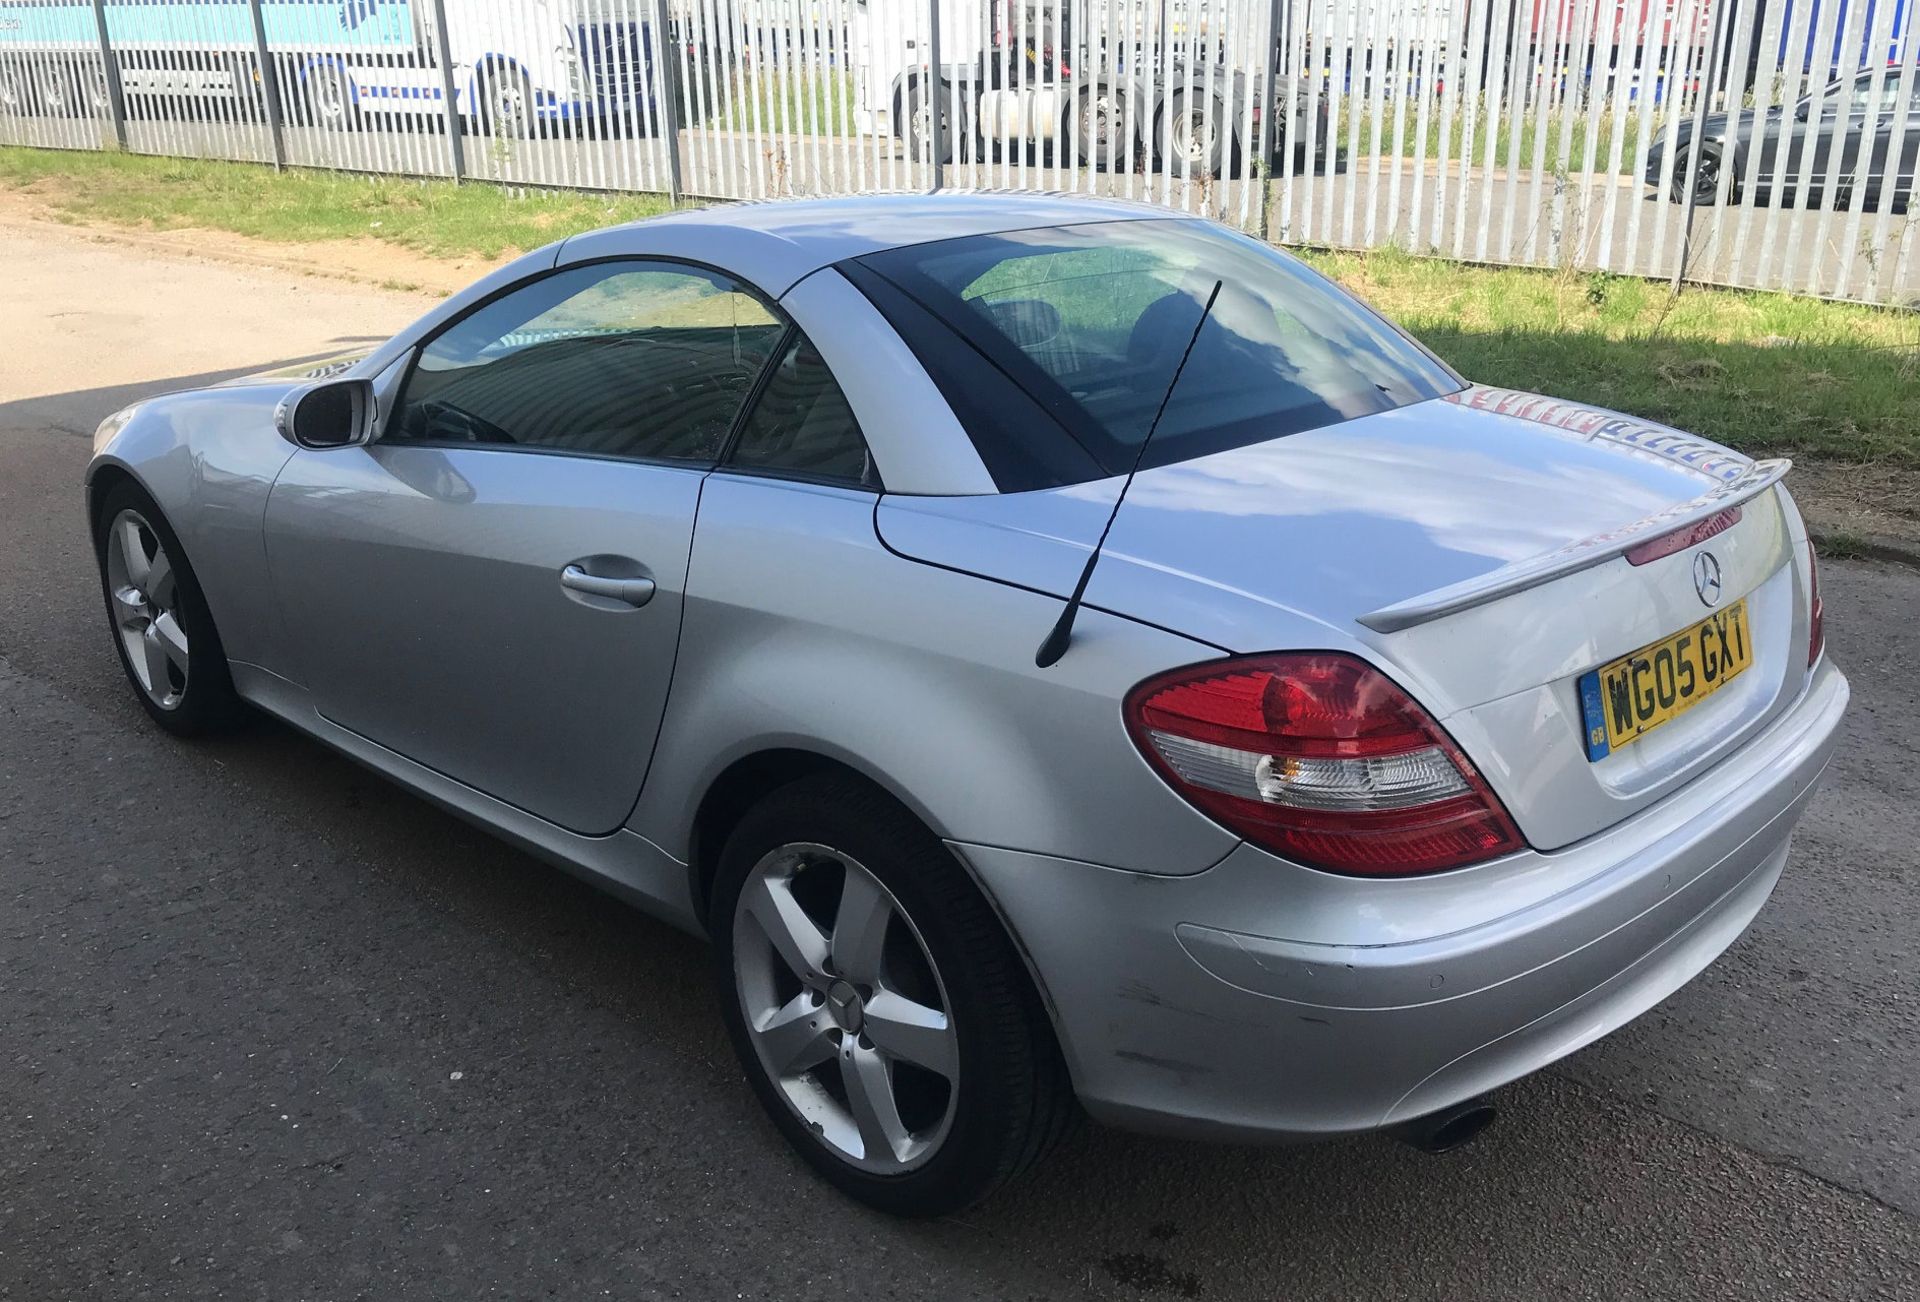 2005 Mercedes SLK 350 2 Dr Convertible - CL505 - NO VAT ON THE HAMMER - Location: Corby, N - Image 4 of 18